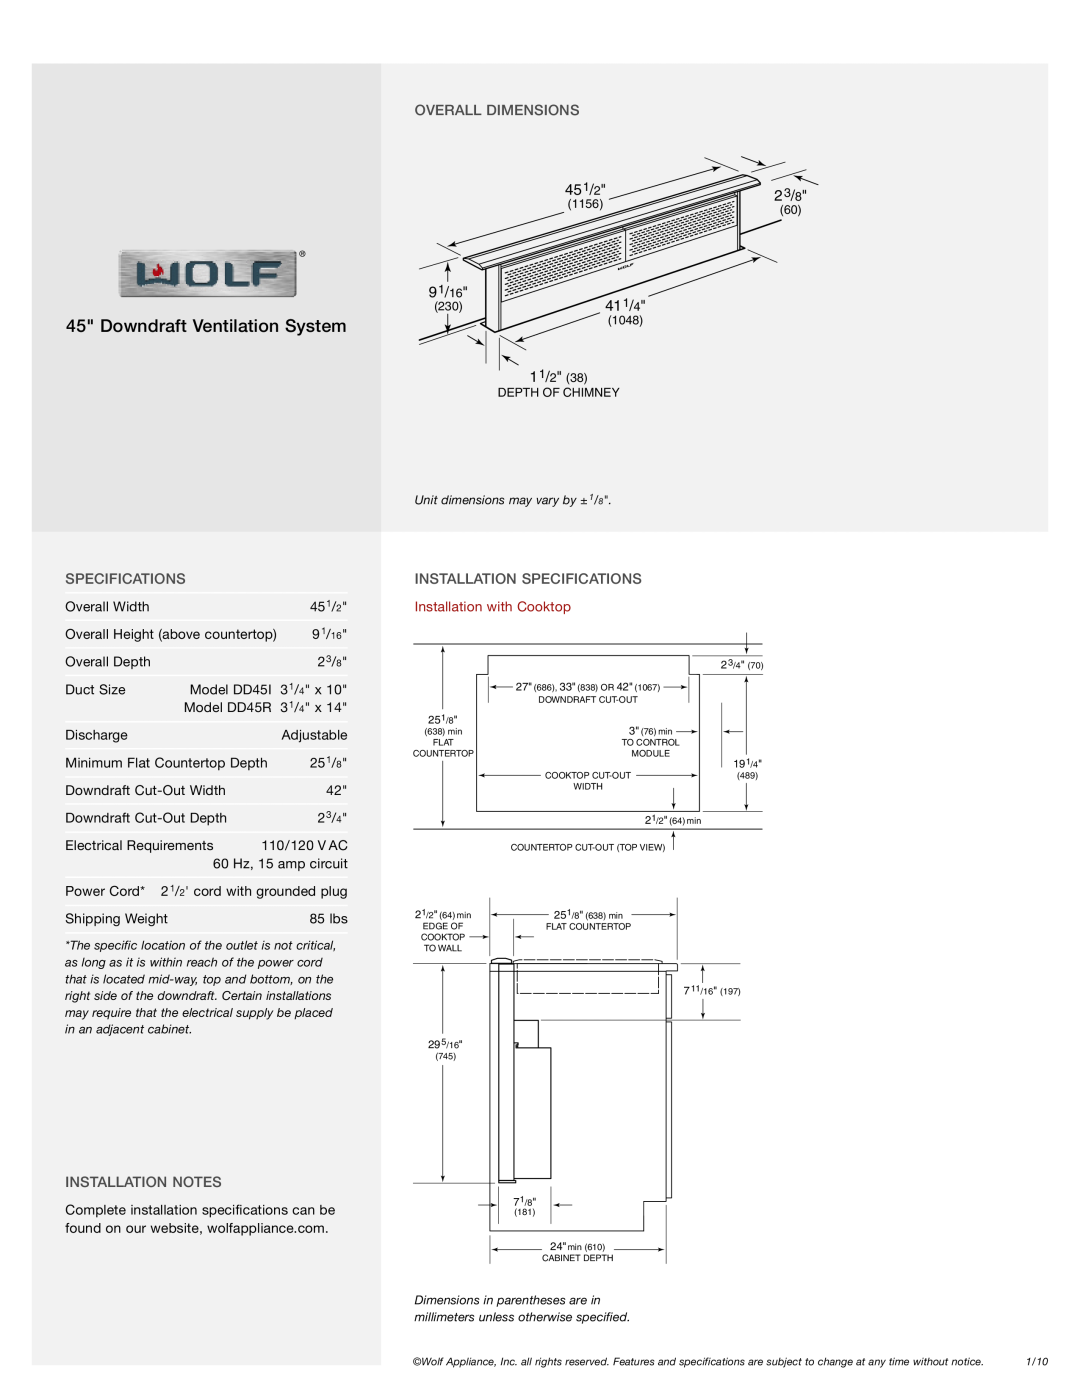 Wolf Appliance Company DD45 Overall Dimensions, Installation Specifications, Installation Notes, 451/2, 23/8, 91/16 